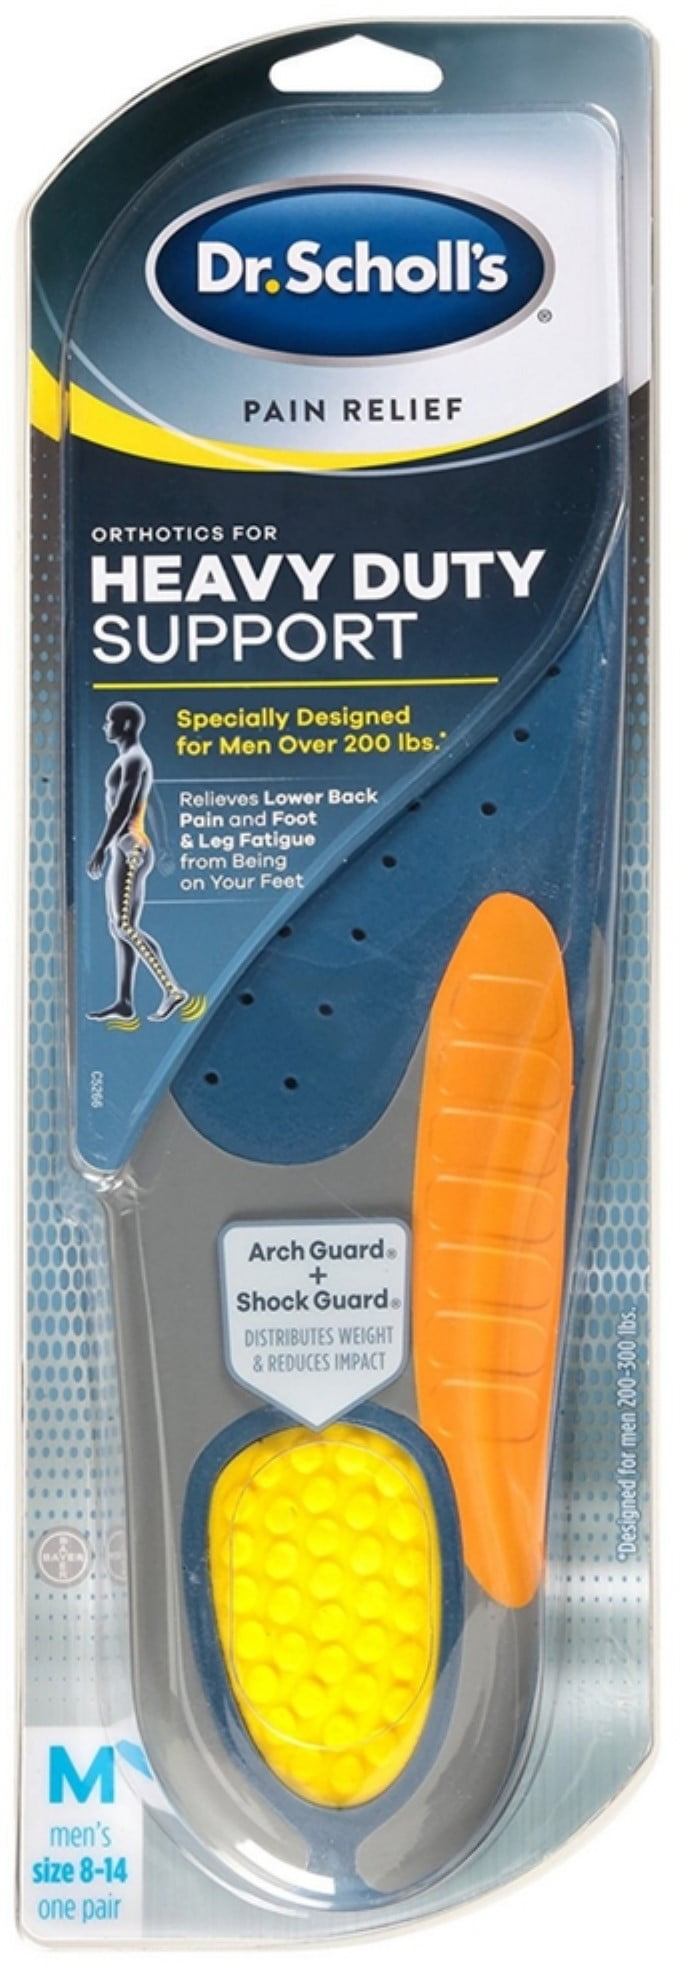 dr scholl's heavy duty support